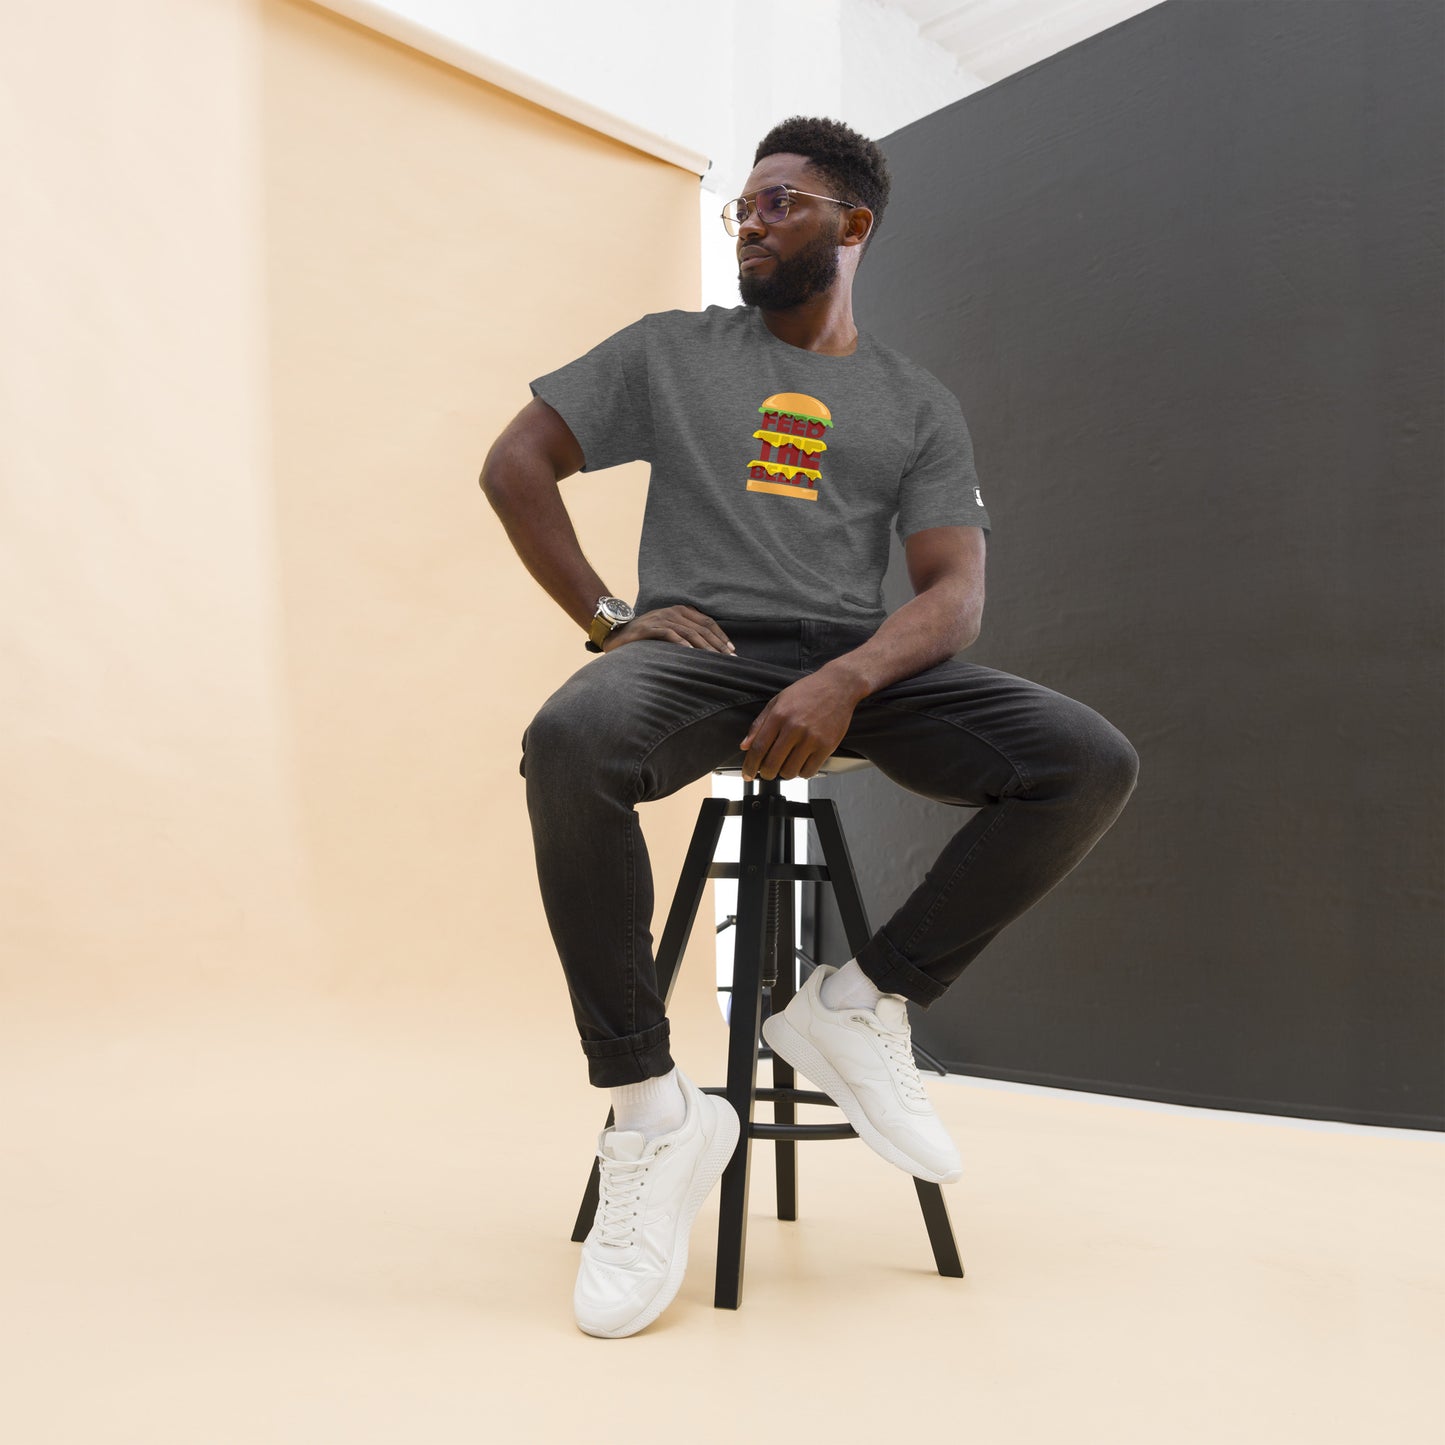 Stylish man with a beard and glasses, wearing a dark gray t-shirt with a colorful stacked burger graphic and 'FEED THE BEAST' text, seated on a tall stool, sporting black jeans and white sneakers, against a peach and black corner wall background.